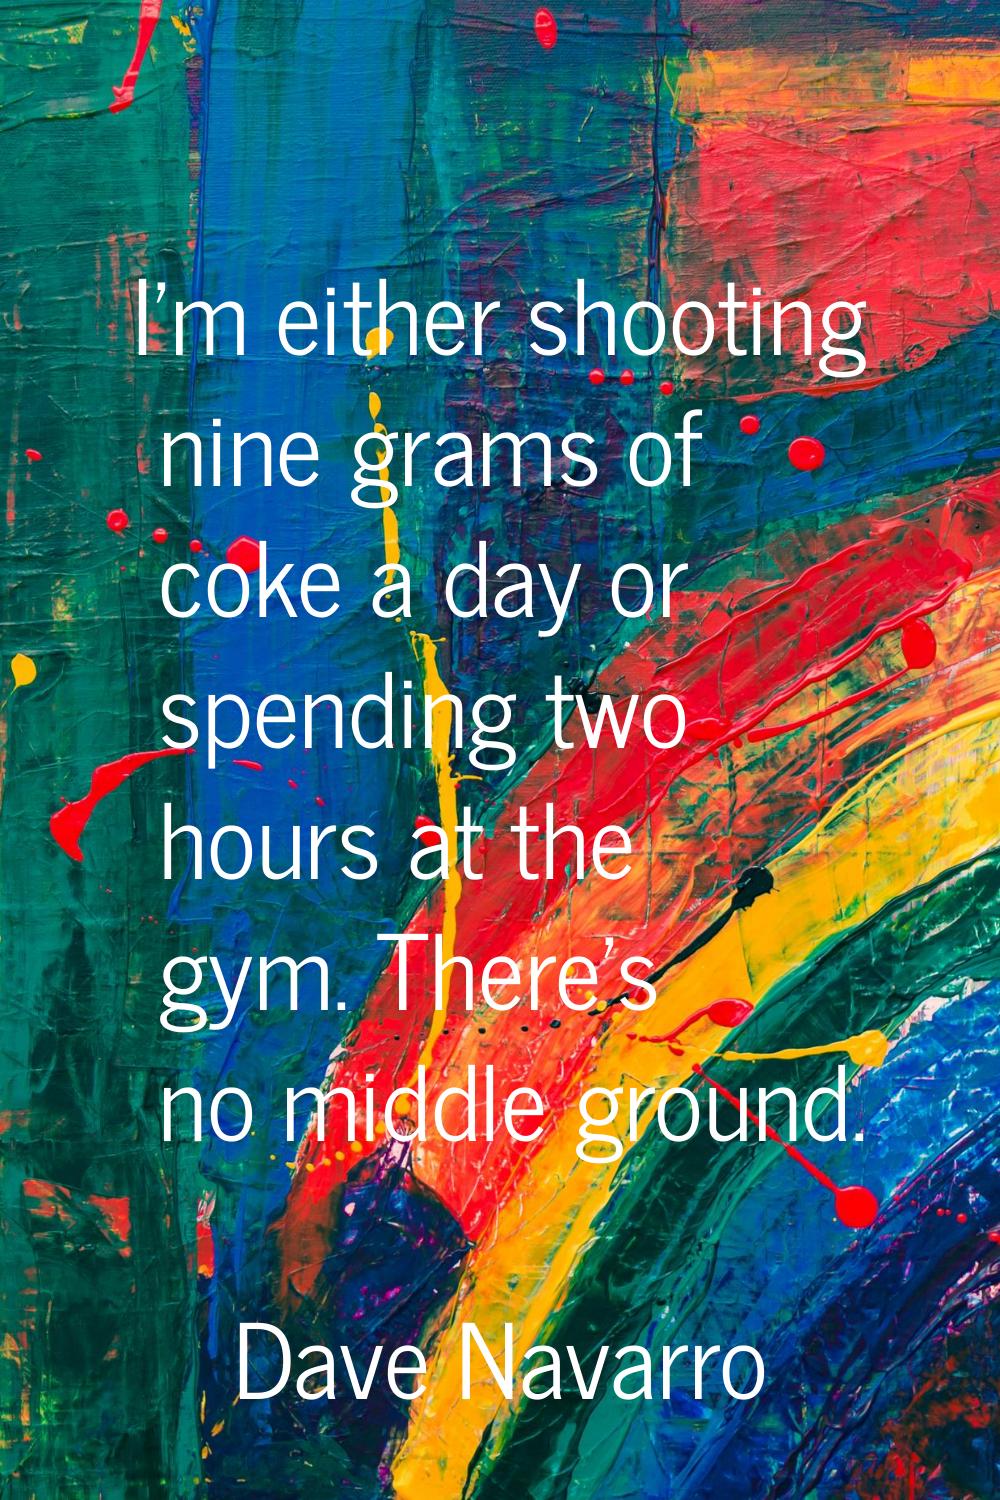 I'm either shooting nine grams of coke a day or spending two hours at the gym. There's no middle gr